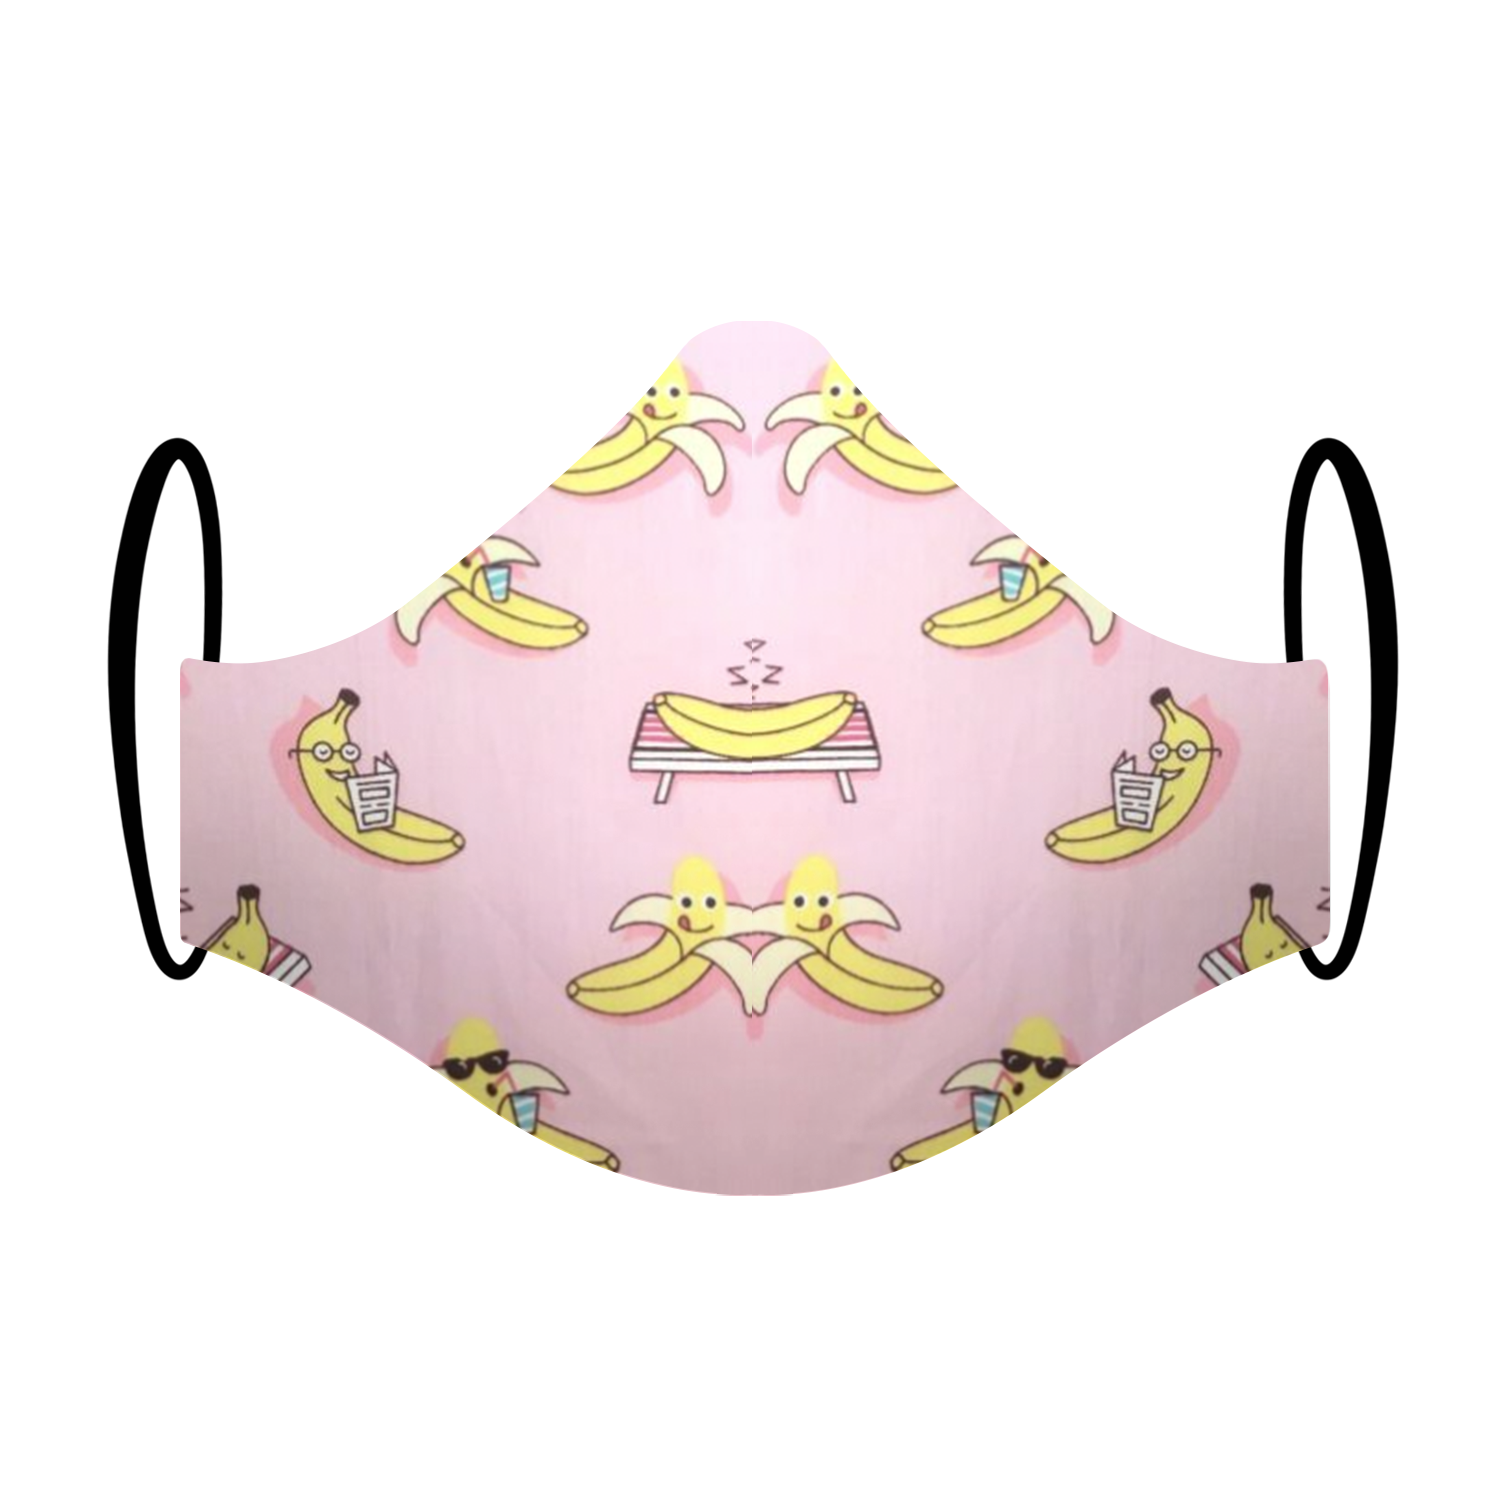 Triple layered face mask made in Melbourne Australia from cotton and poplin featuring a unique lazy banana print